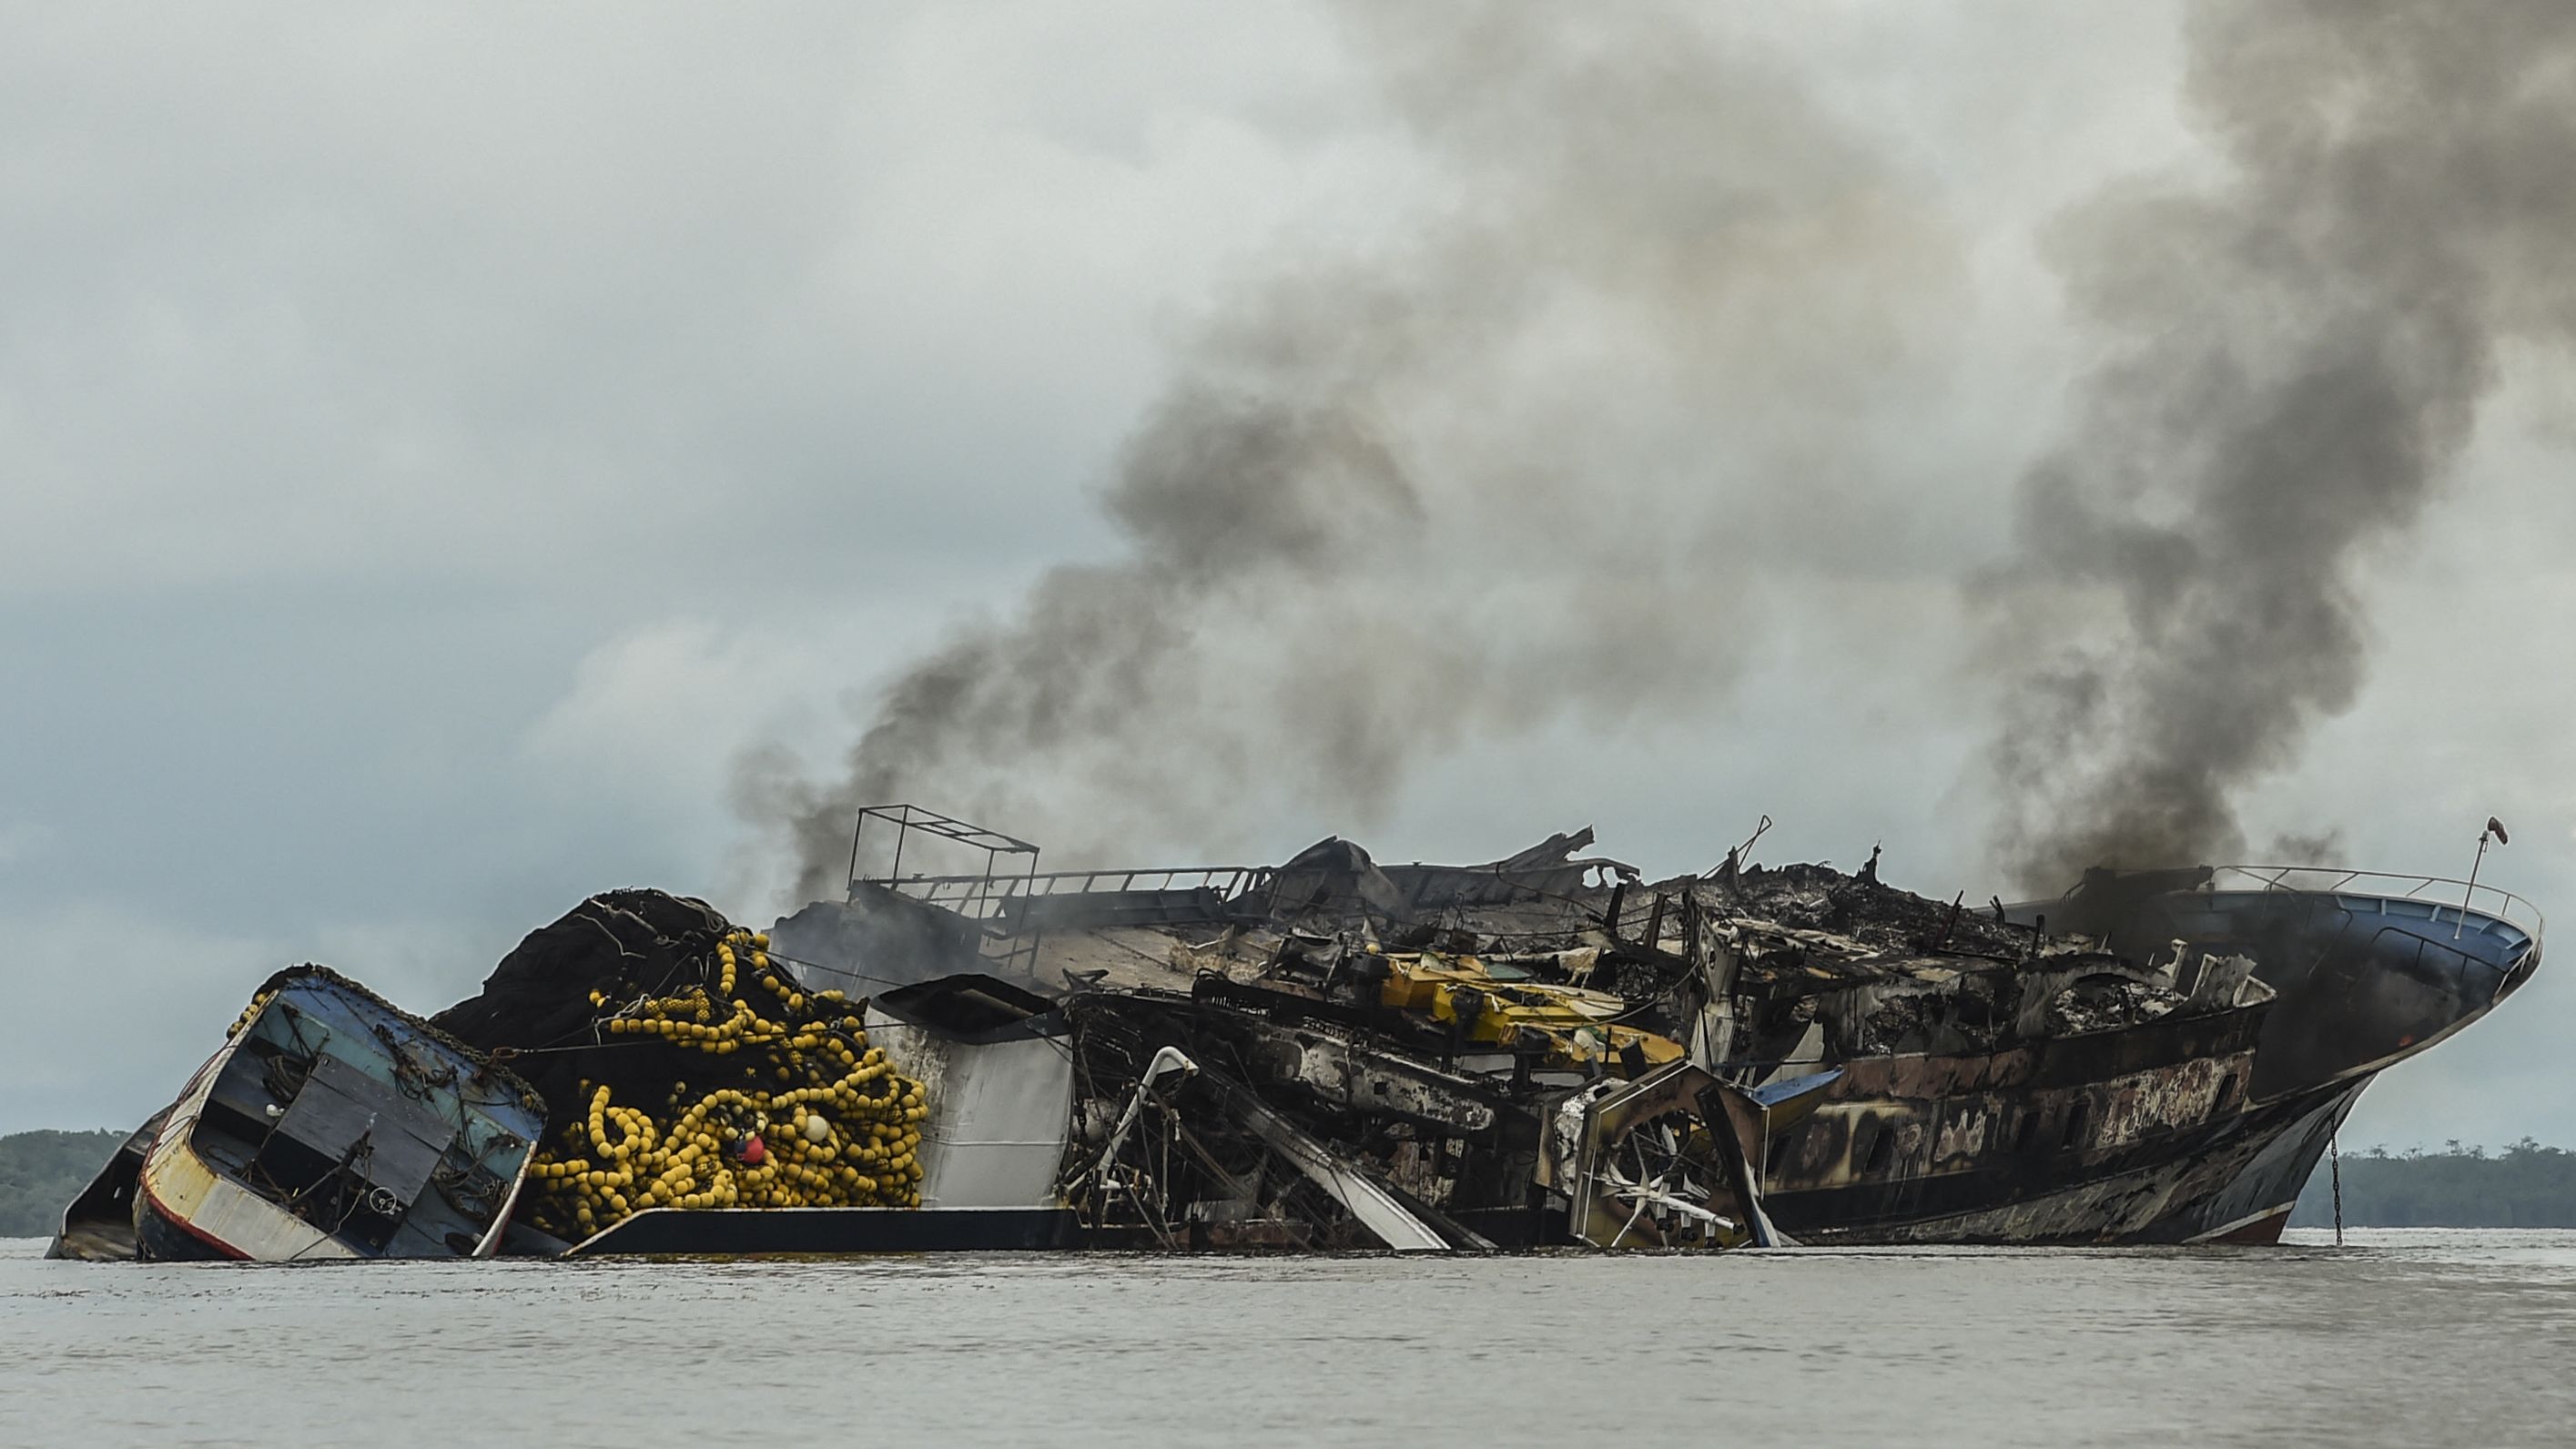 Smoke billows from the Venezuelan ship Taurus 1 as it burns in Colombia's Buenaventura Bay on Tuesday, September 6. Twenty-nine people were rescued after a fire broke out on the boat, the Colombian Navy said.